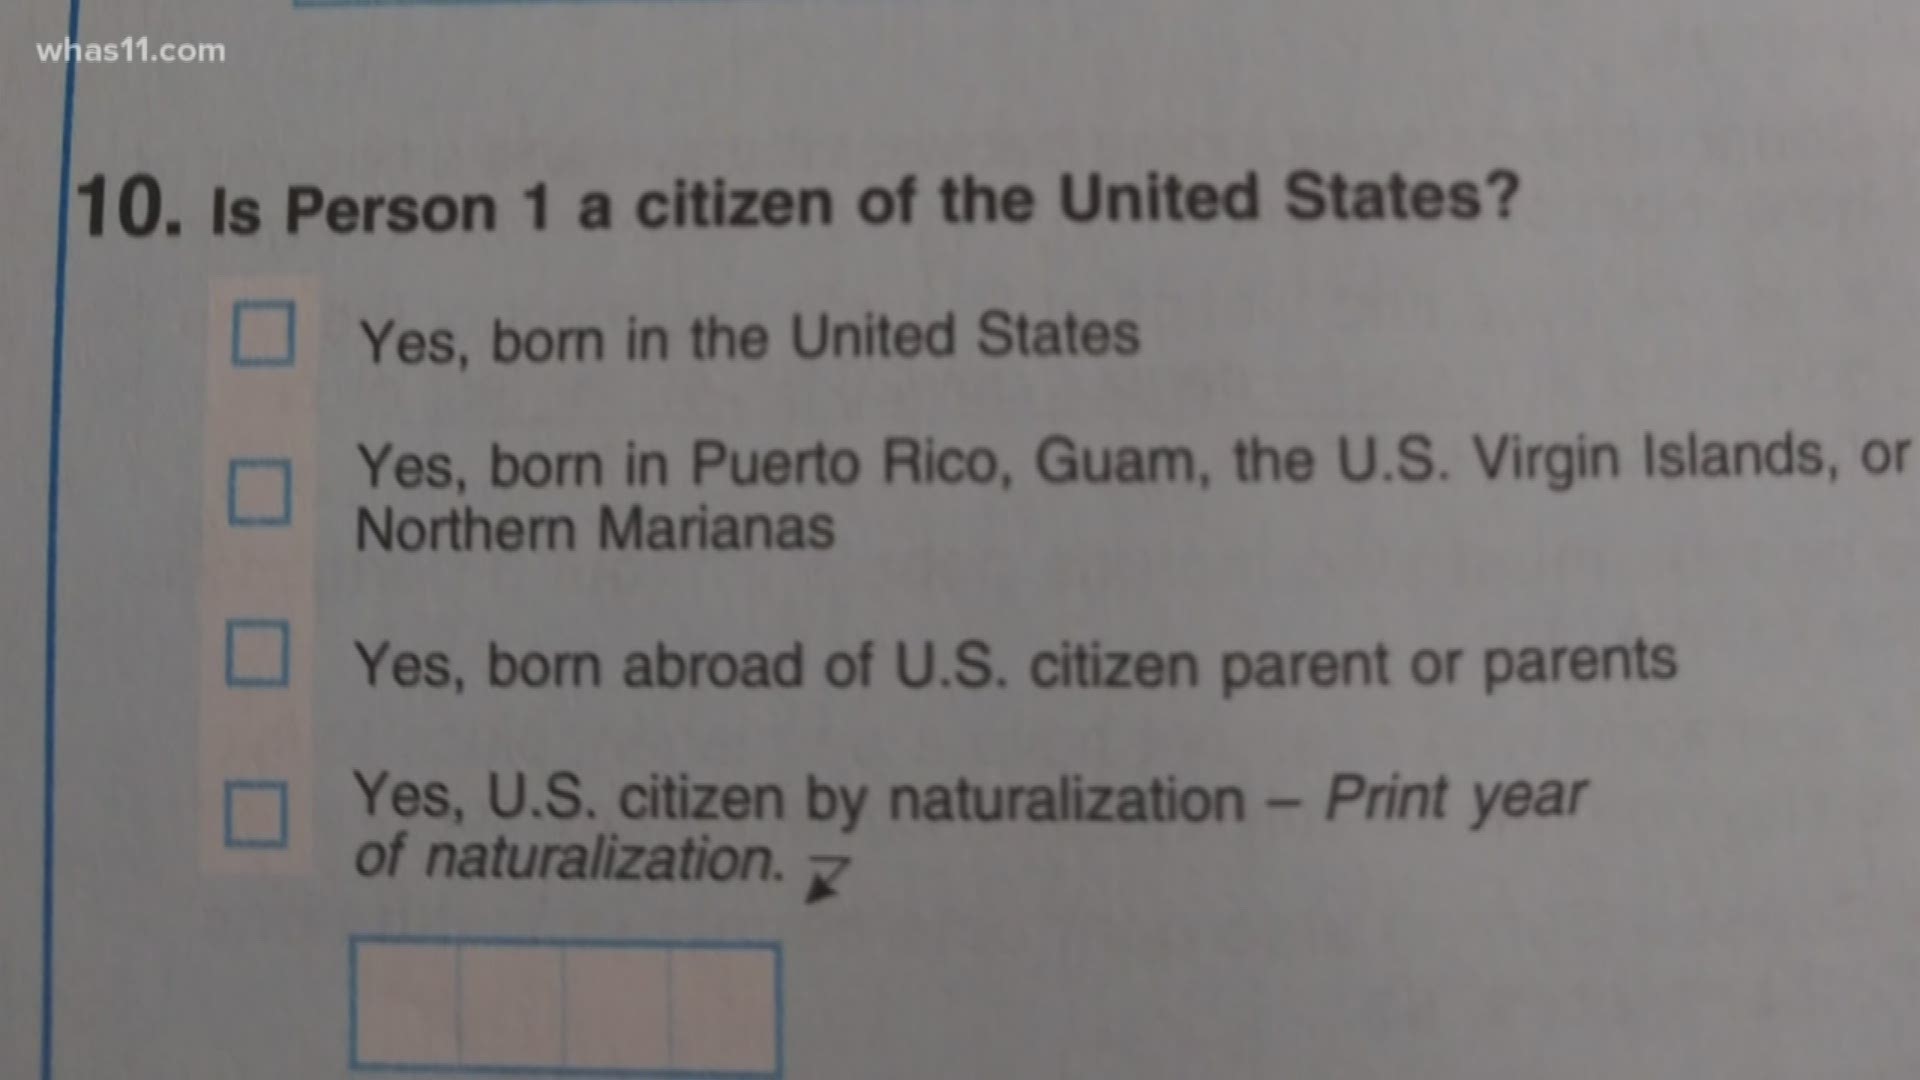 The Supreme Court said no for now on adding a question on citizenship to the census form. So why are people getting a form with the question on it?